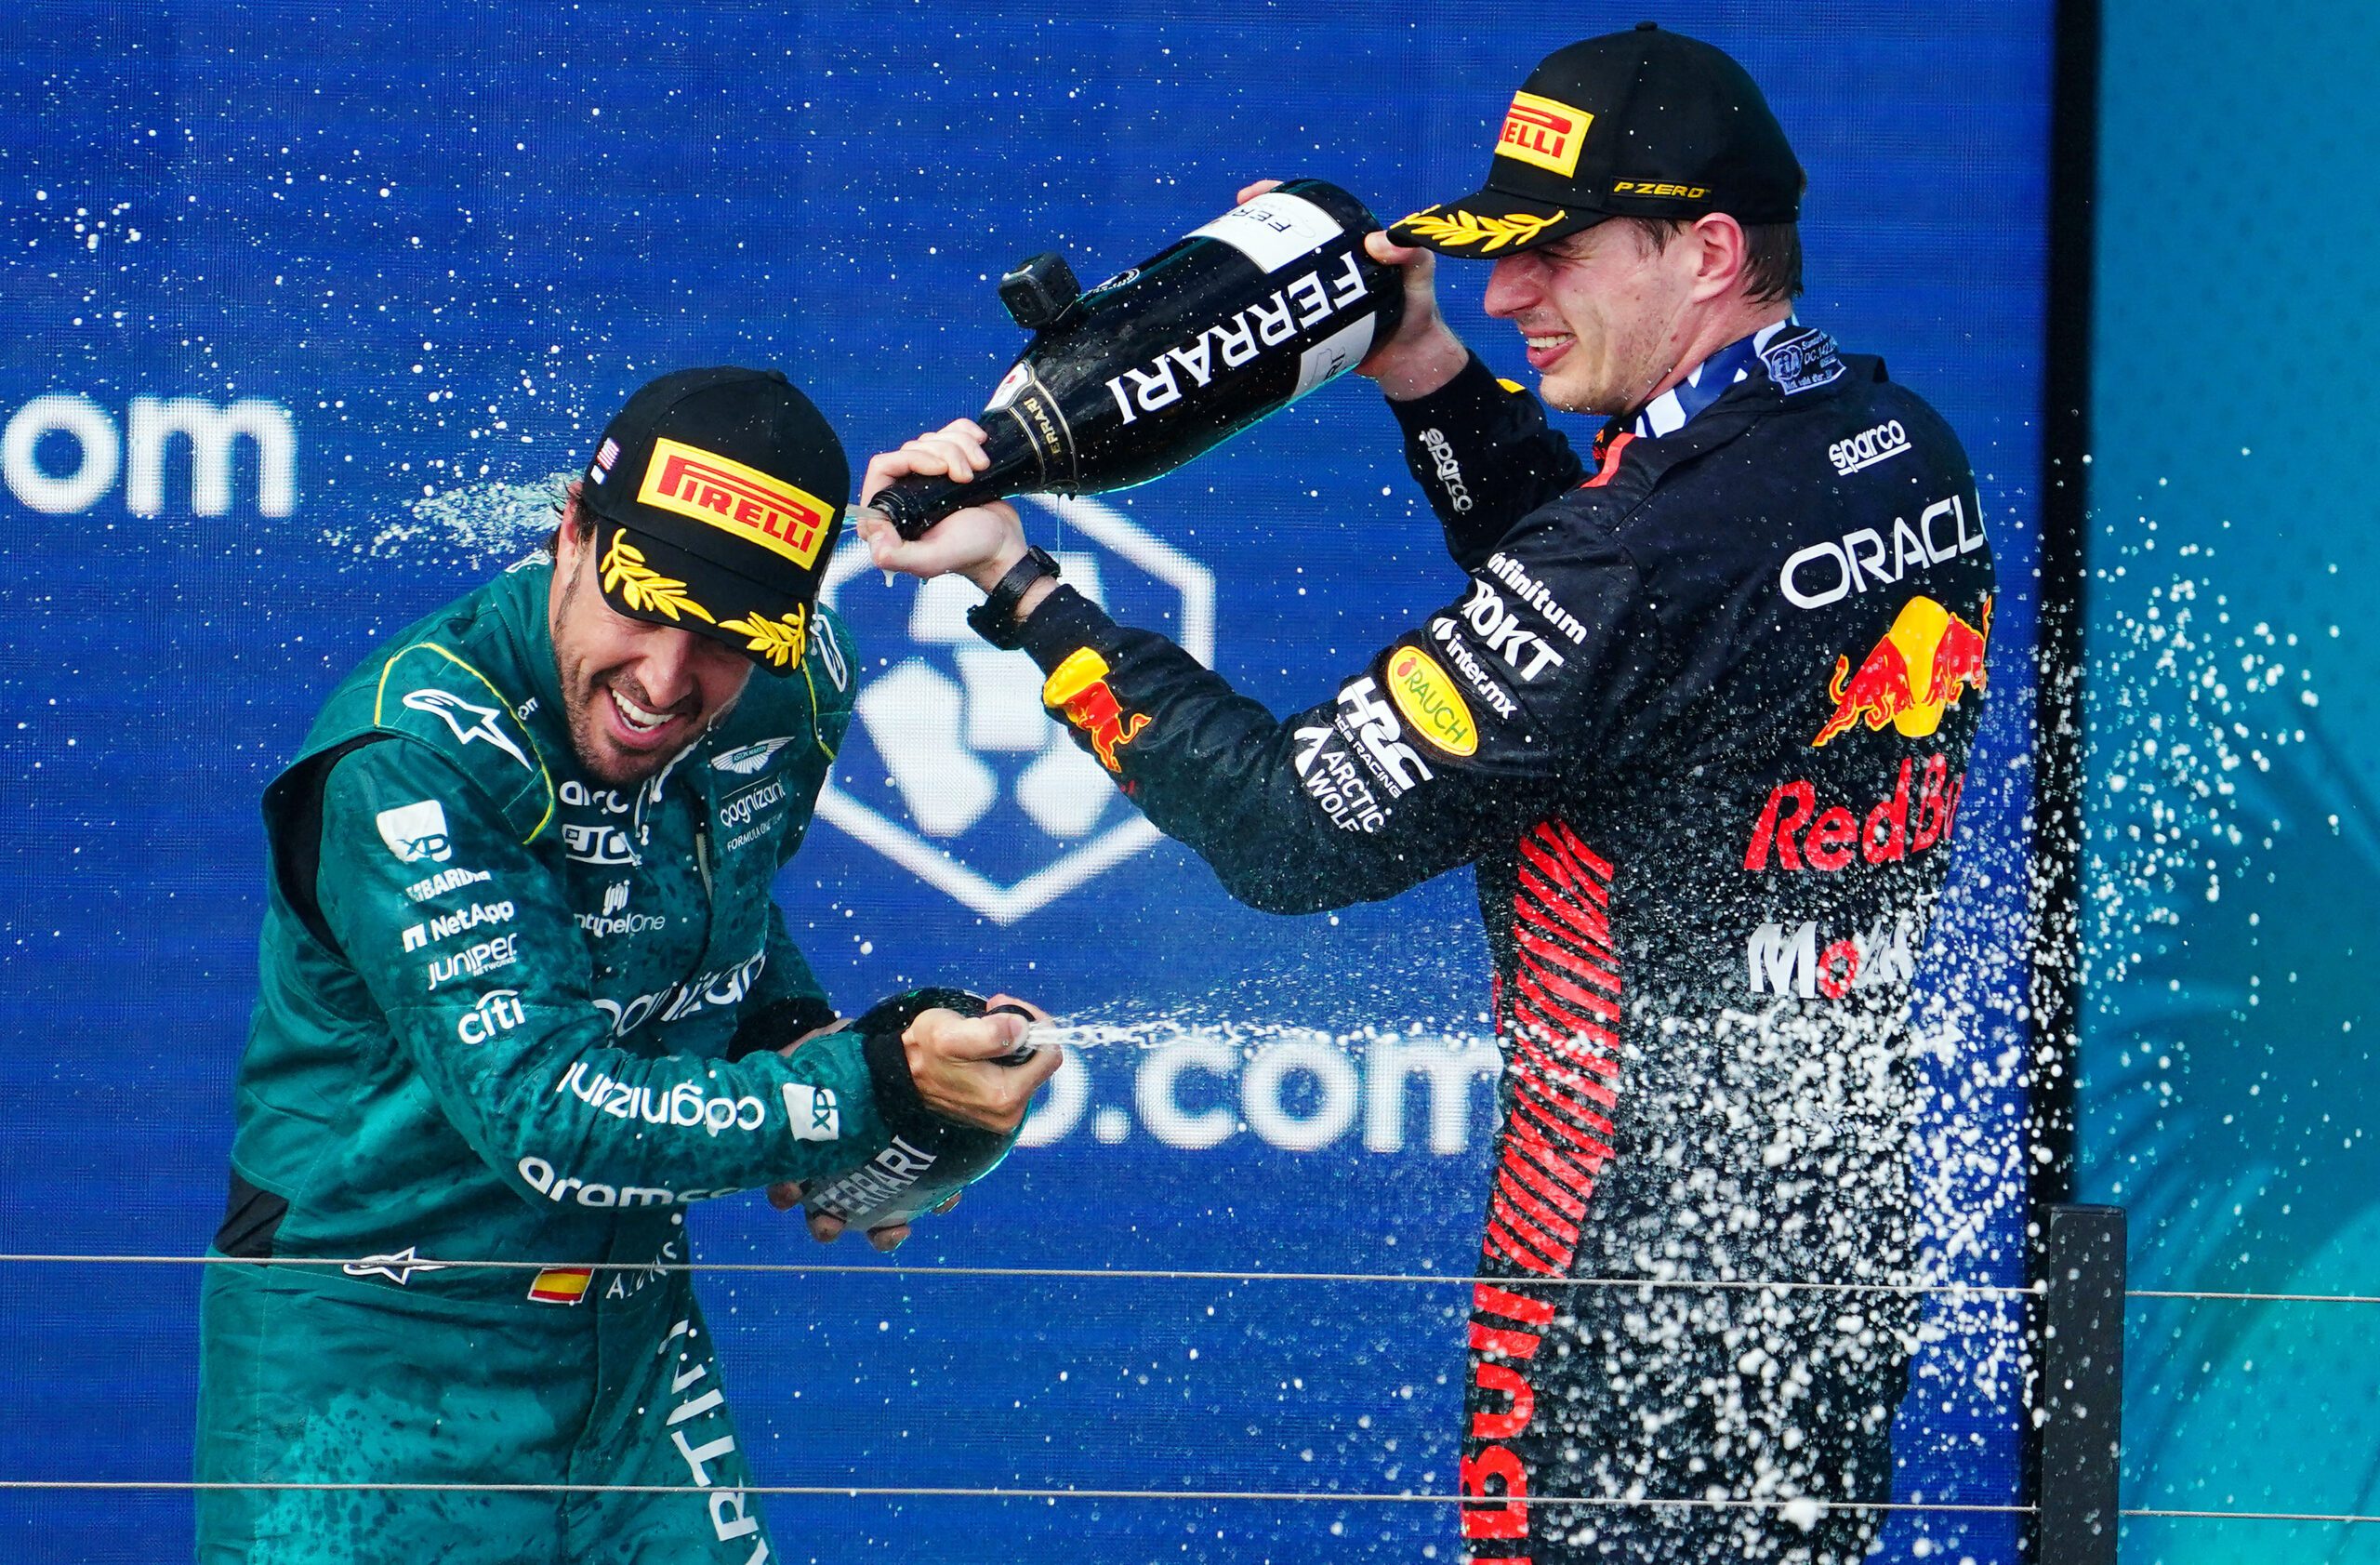 Max Verstappen leads rampaging Red Bulls to 1-2 finish in Miami